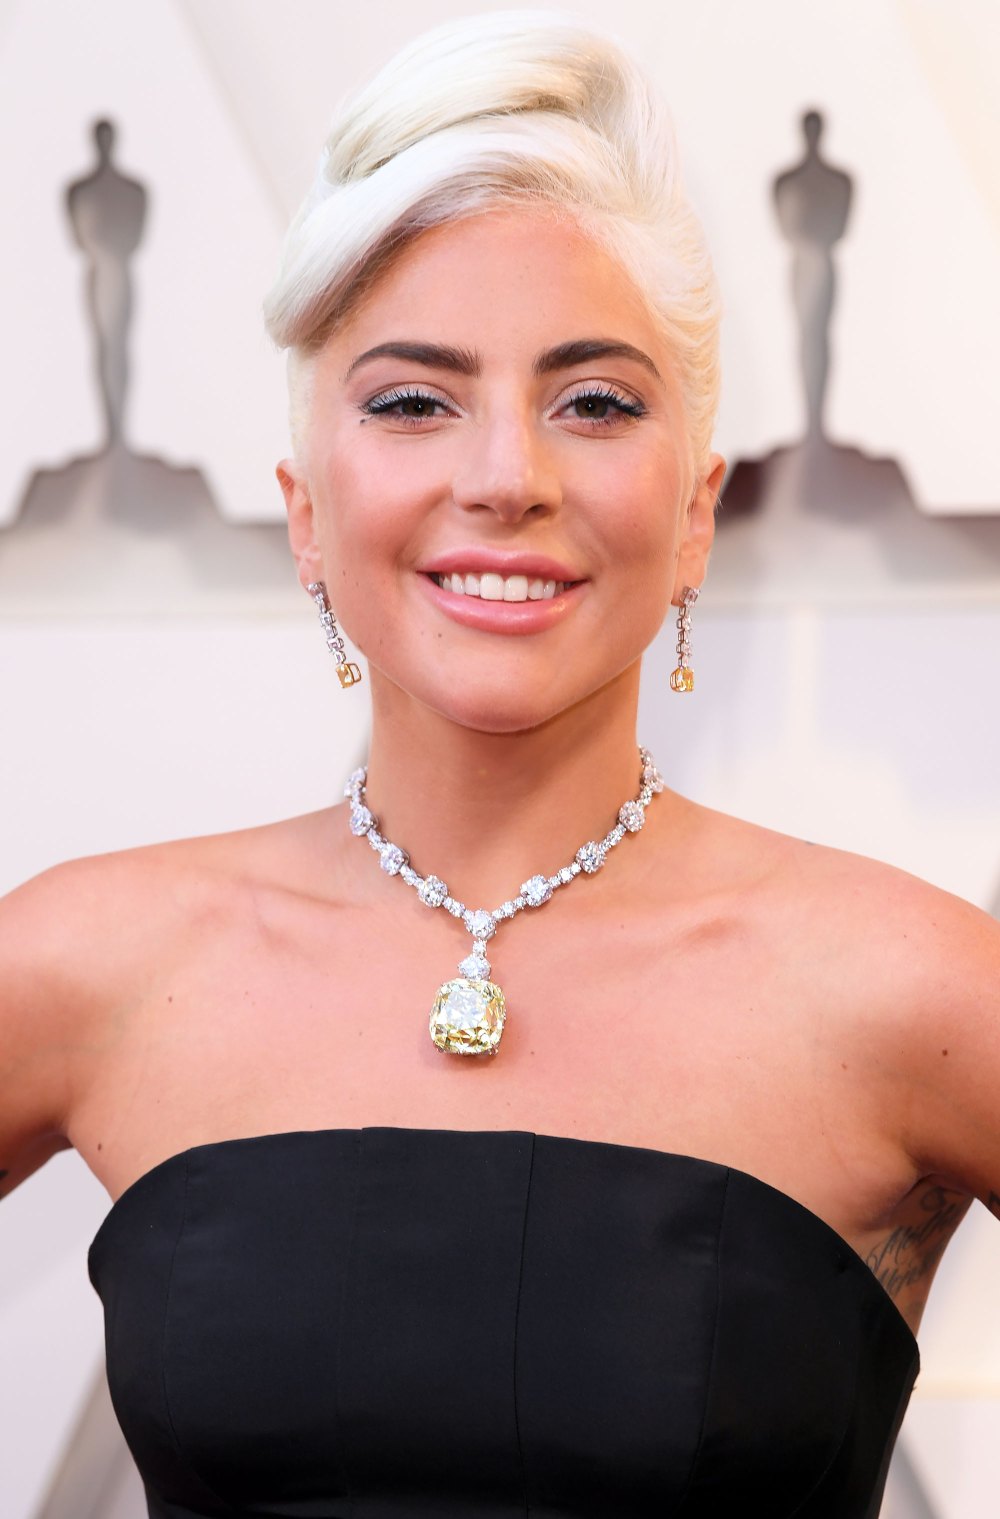 Lady Gaga Wears $30 Million Necklace to Taco Bell